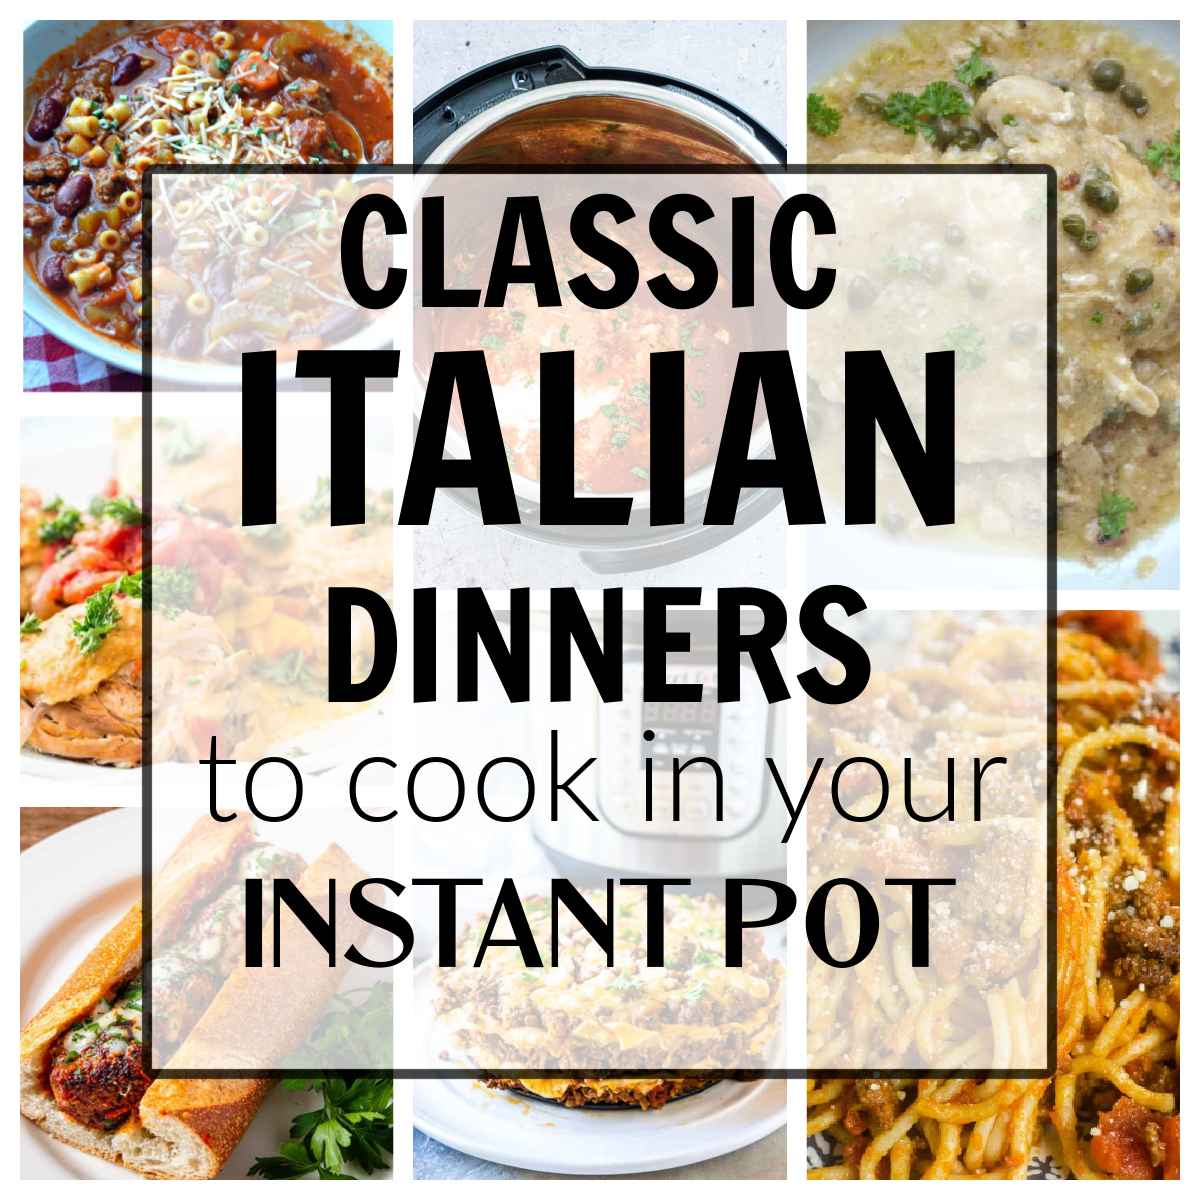 17 Classic Italian Recipes to make in your Instant Pot